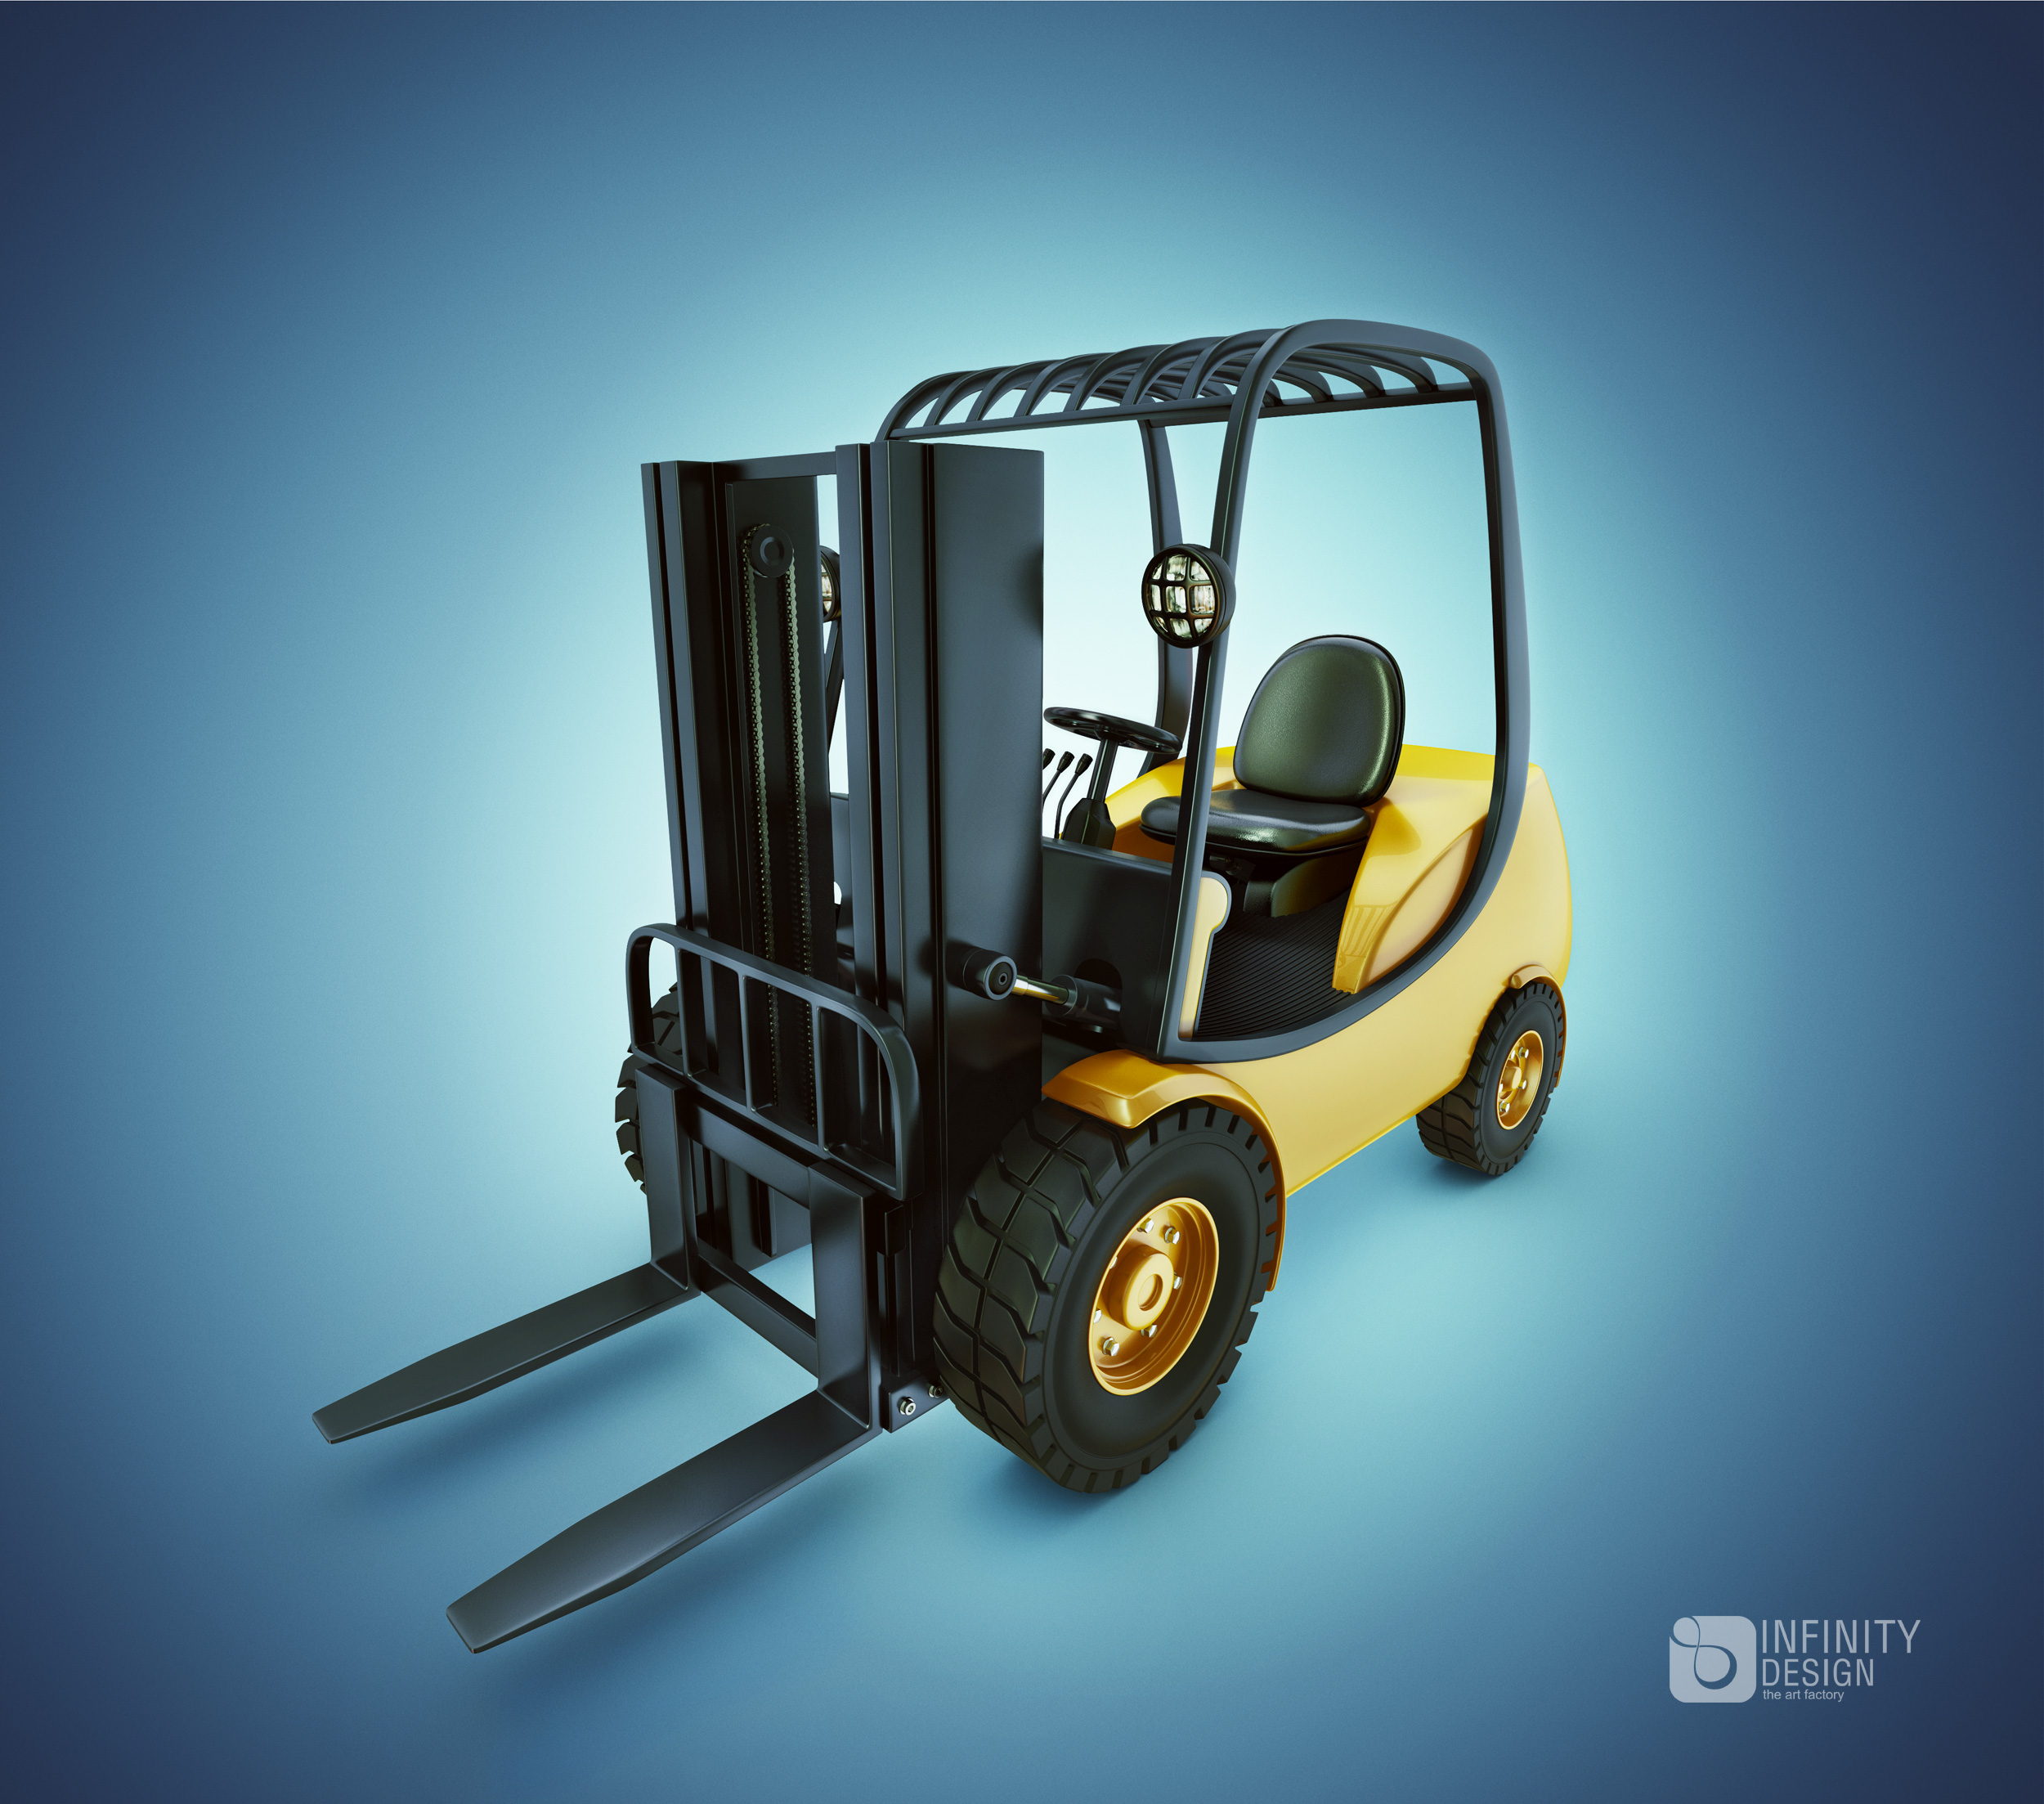 1 Forklift Hd Wallpapers Background Images Wallpaper Abyss HD Wallpapers Download Free Map Images Wallpaper [wallpaper376.blogspot.com]